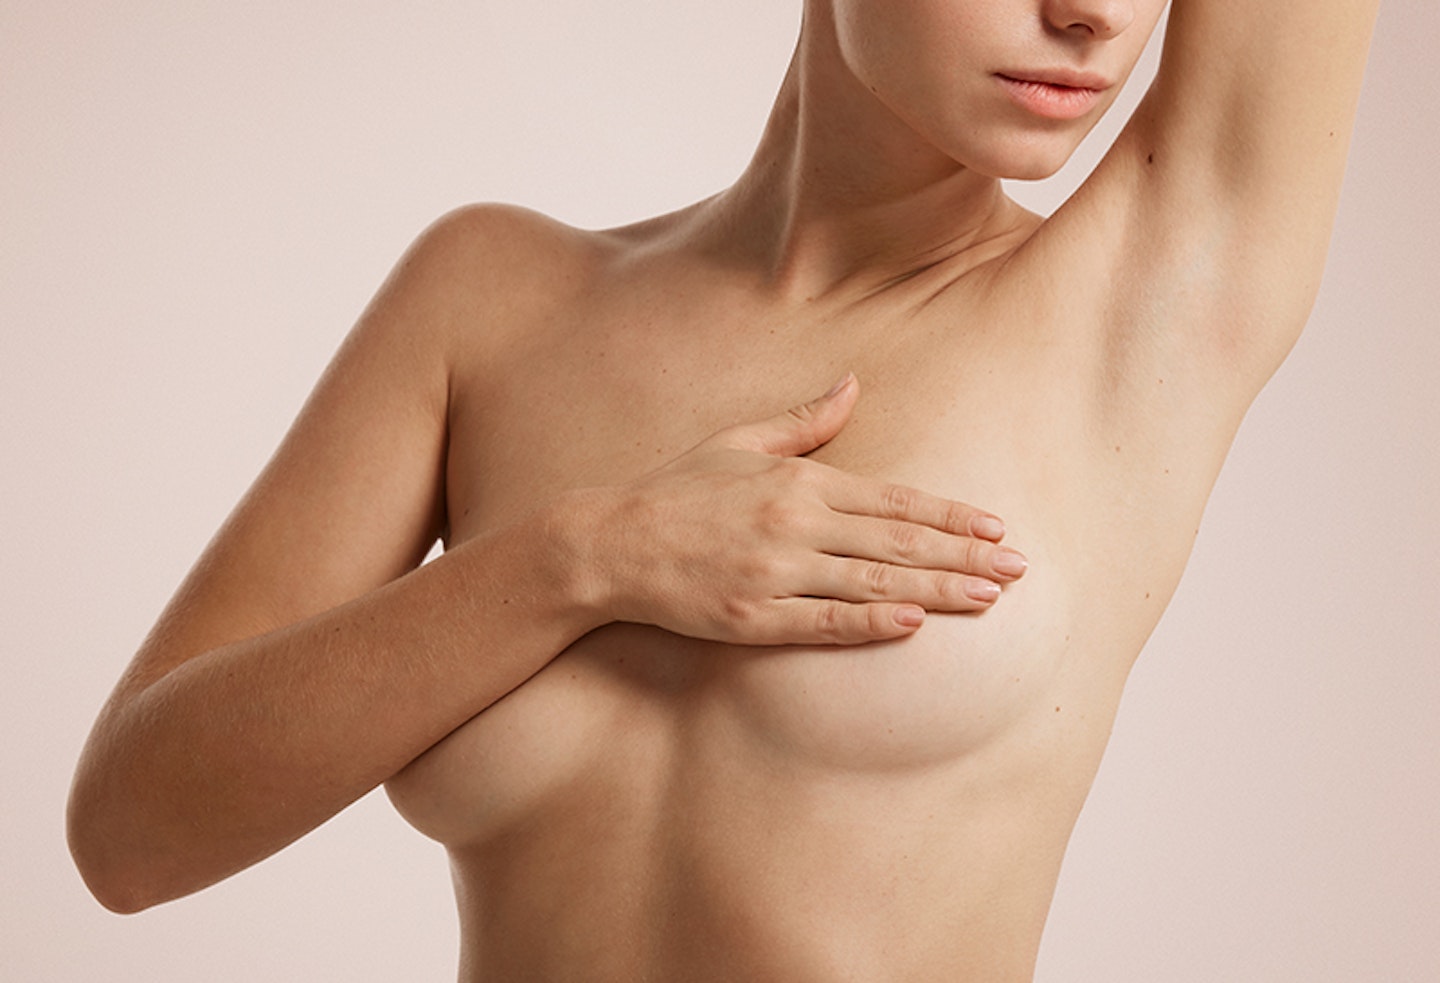 Breast and Nipple Care During Pregnancy